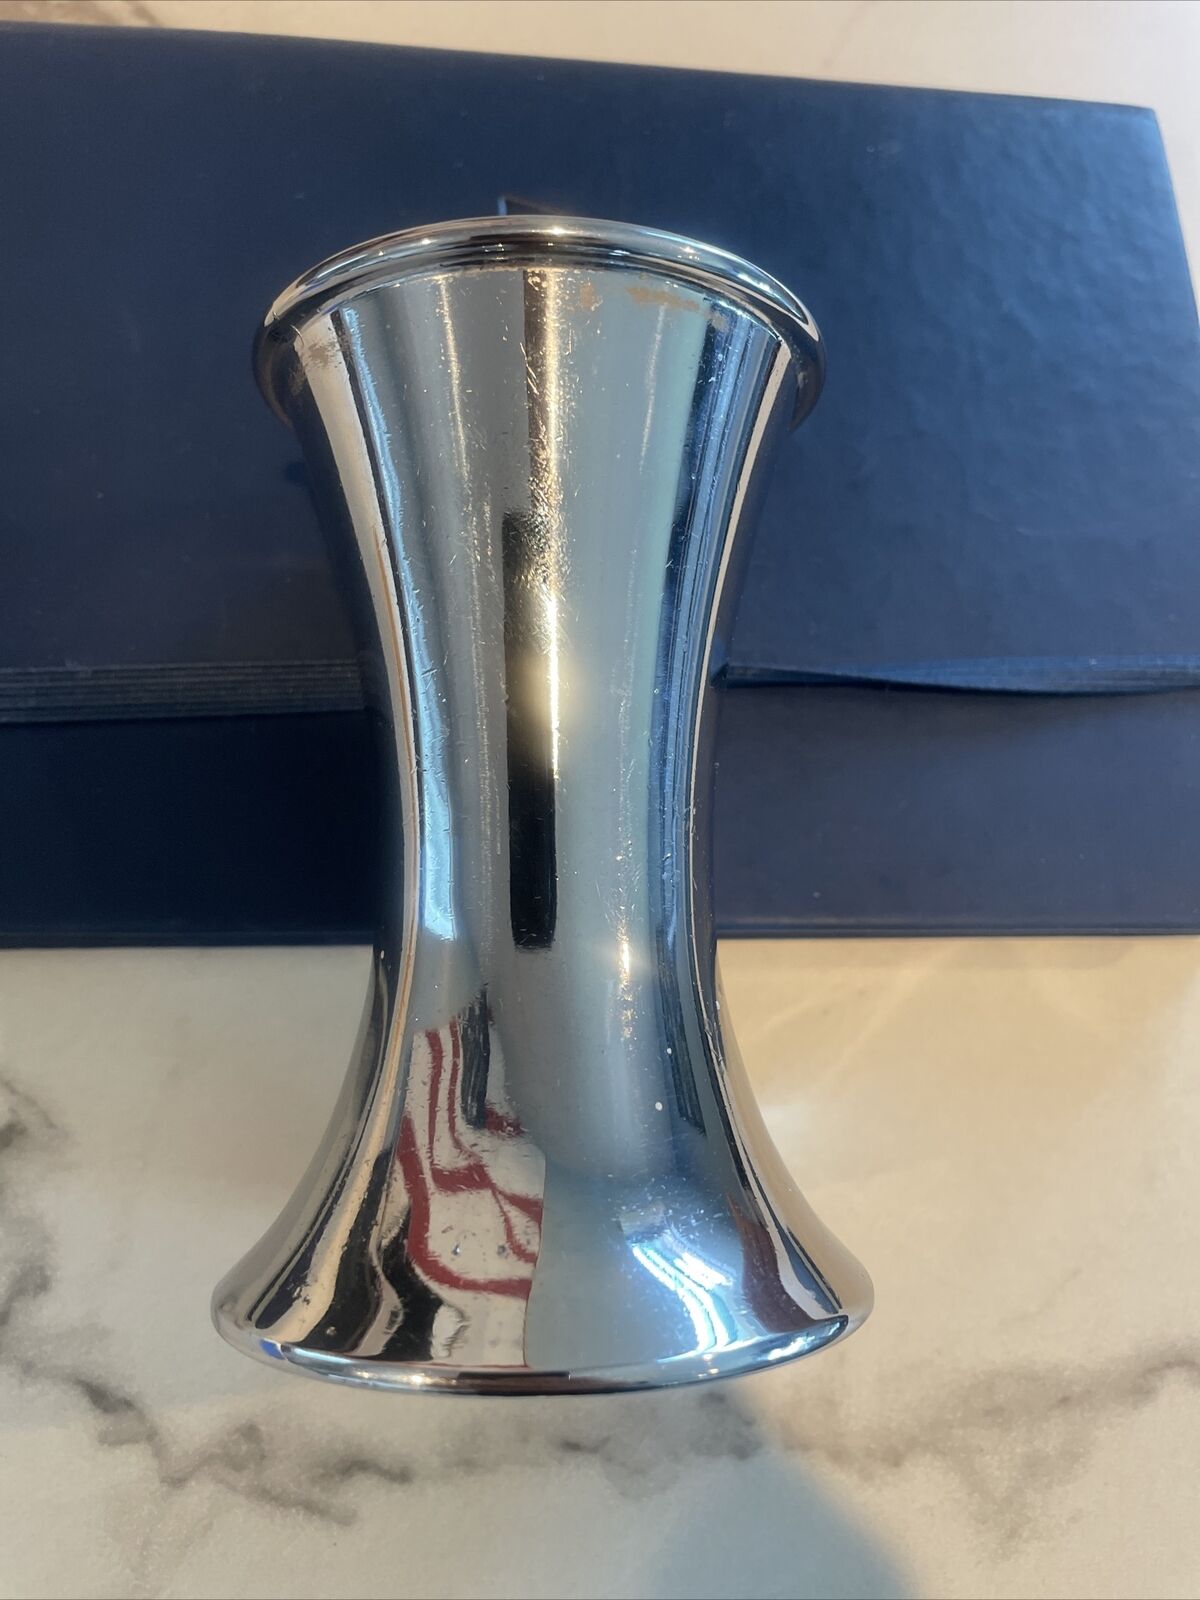 Vintage Chrome Finish Metal Dixie Cup Holder #8727 Very Good Condition